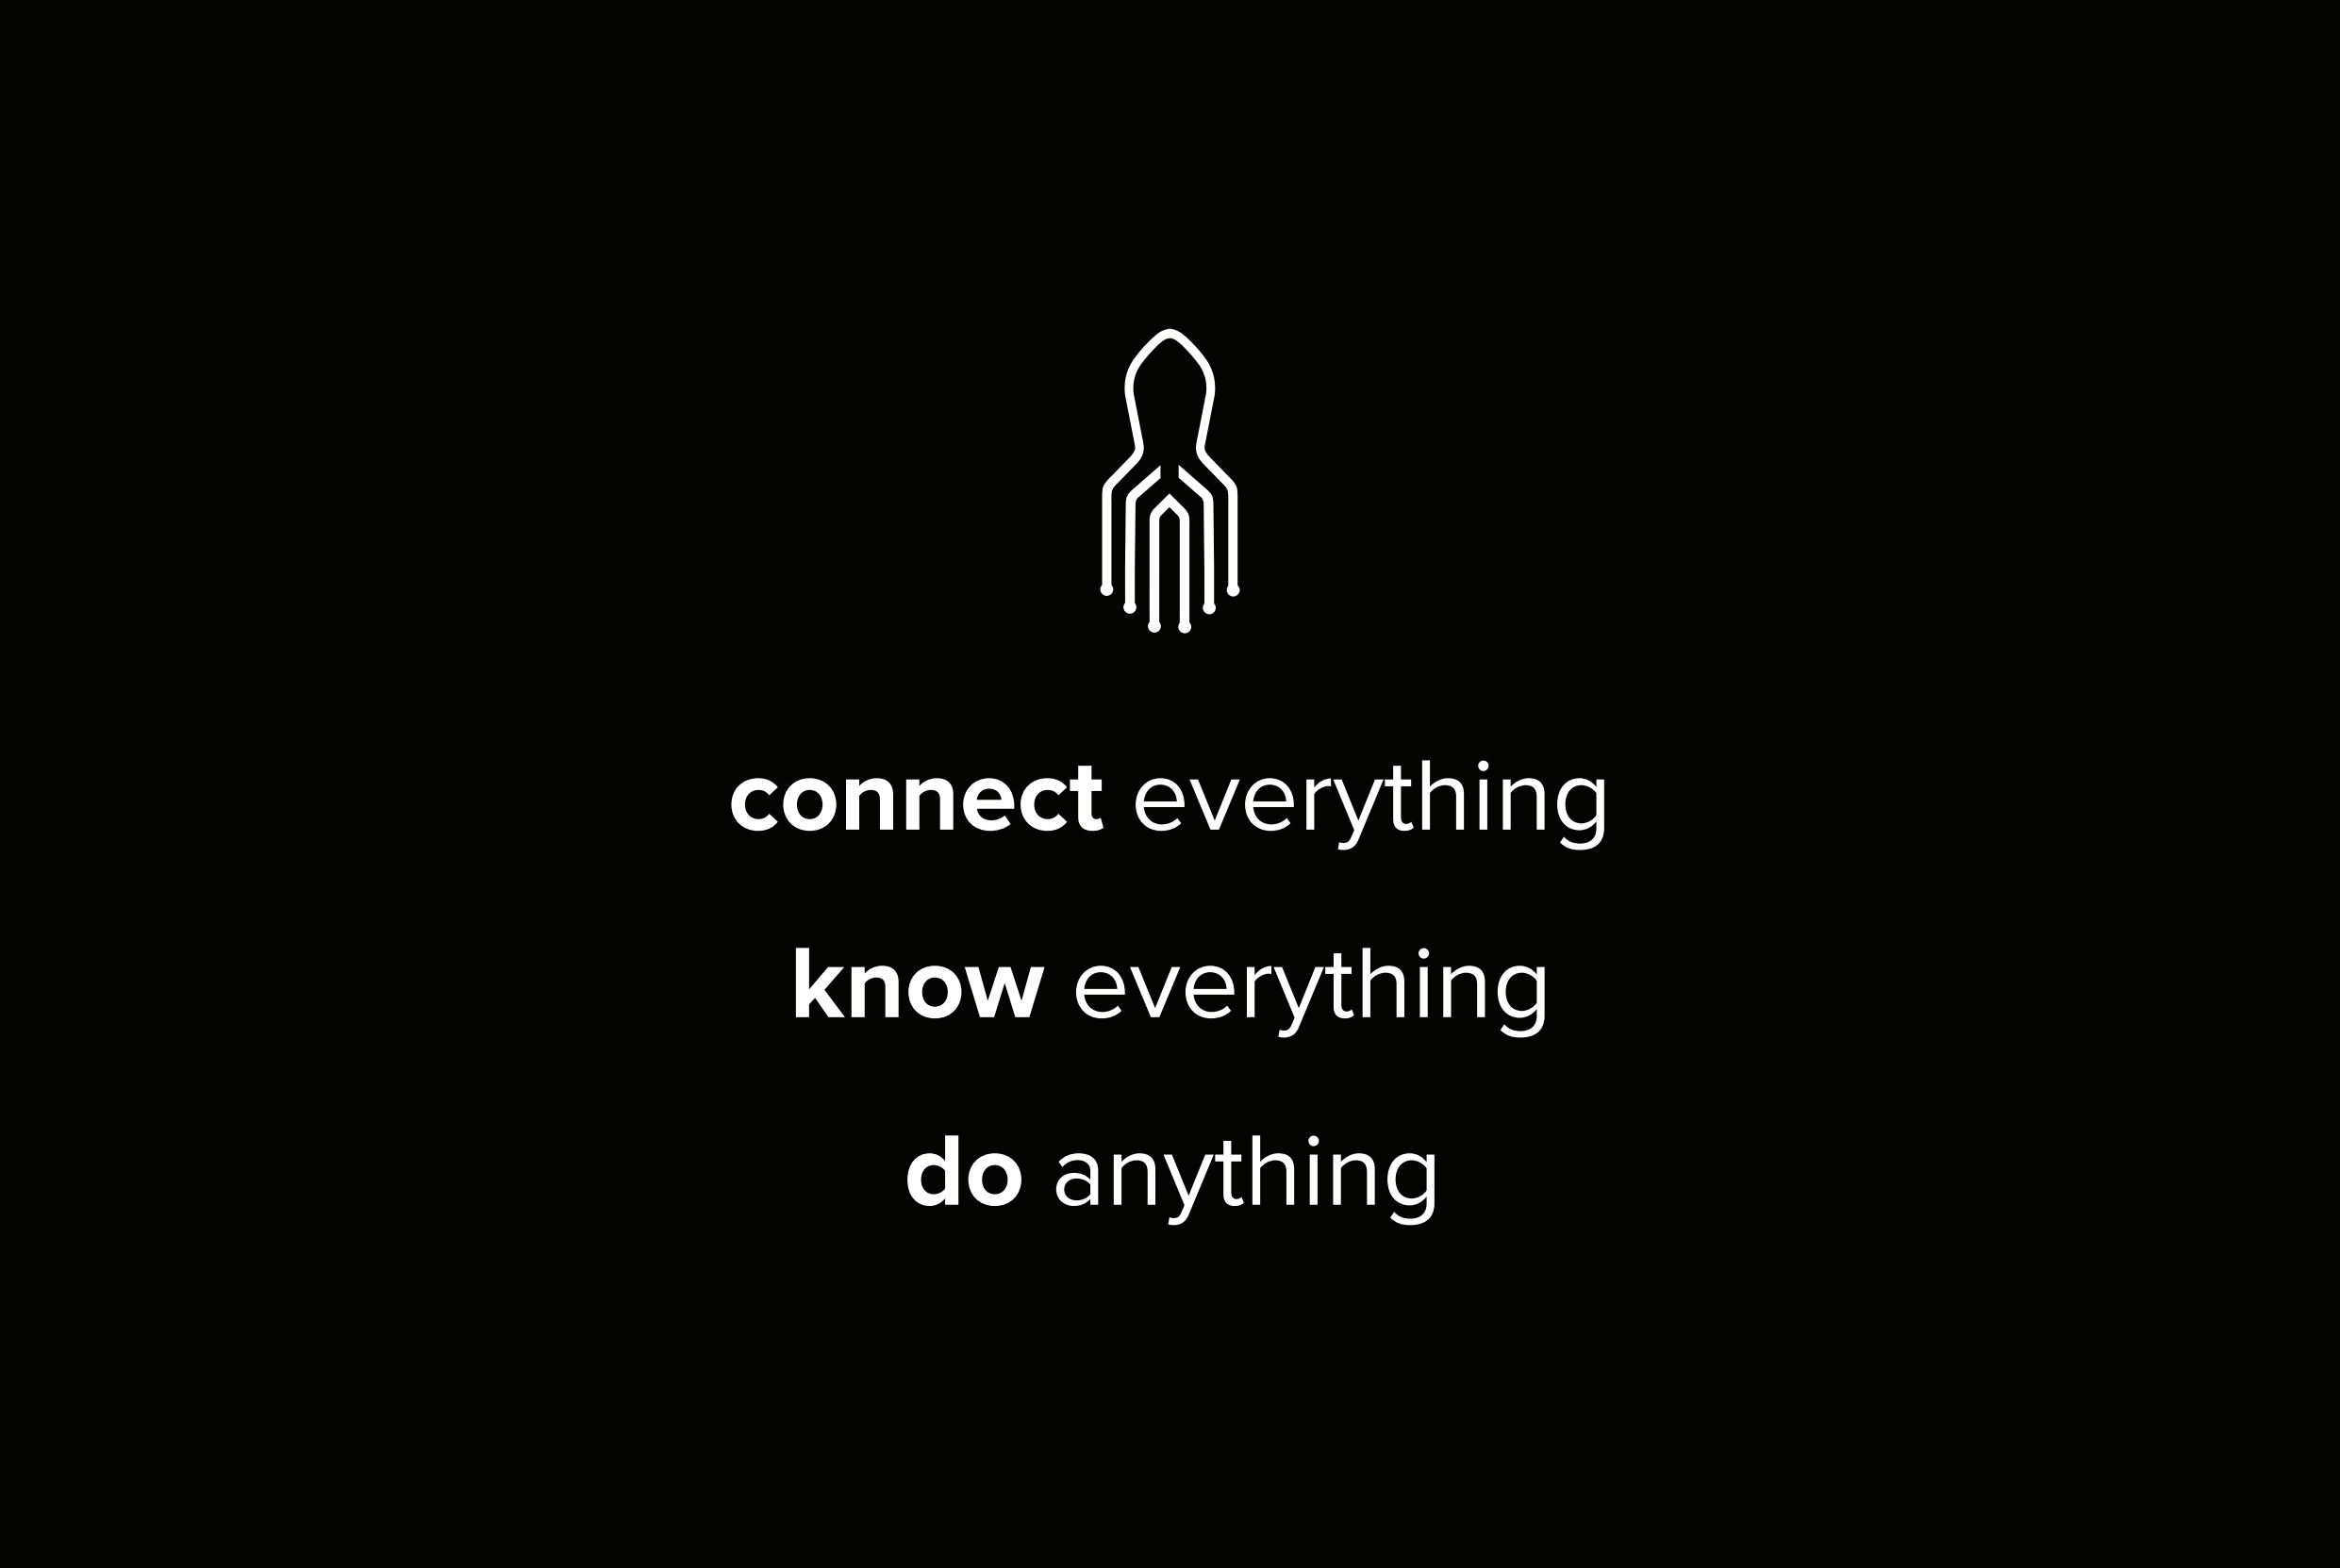 Connect everything, Achieve anything